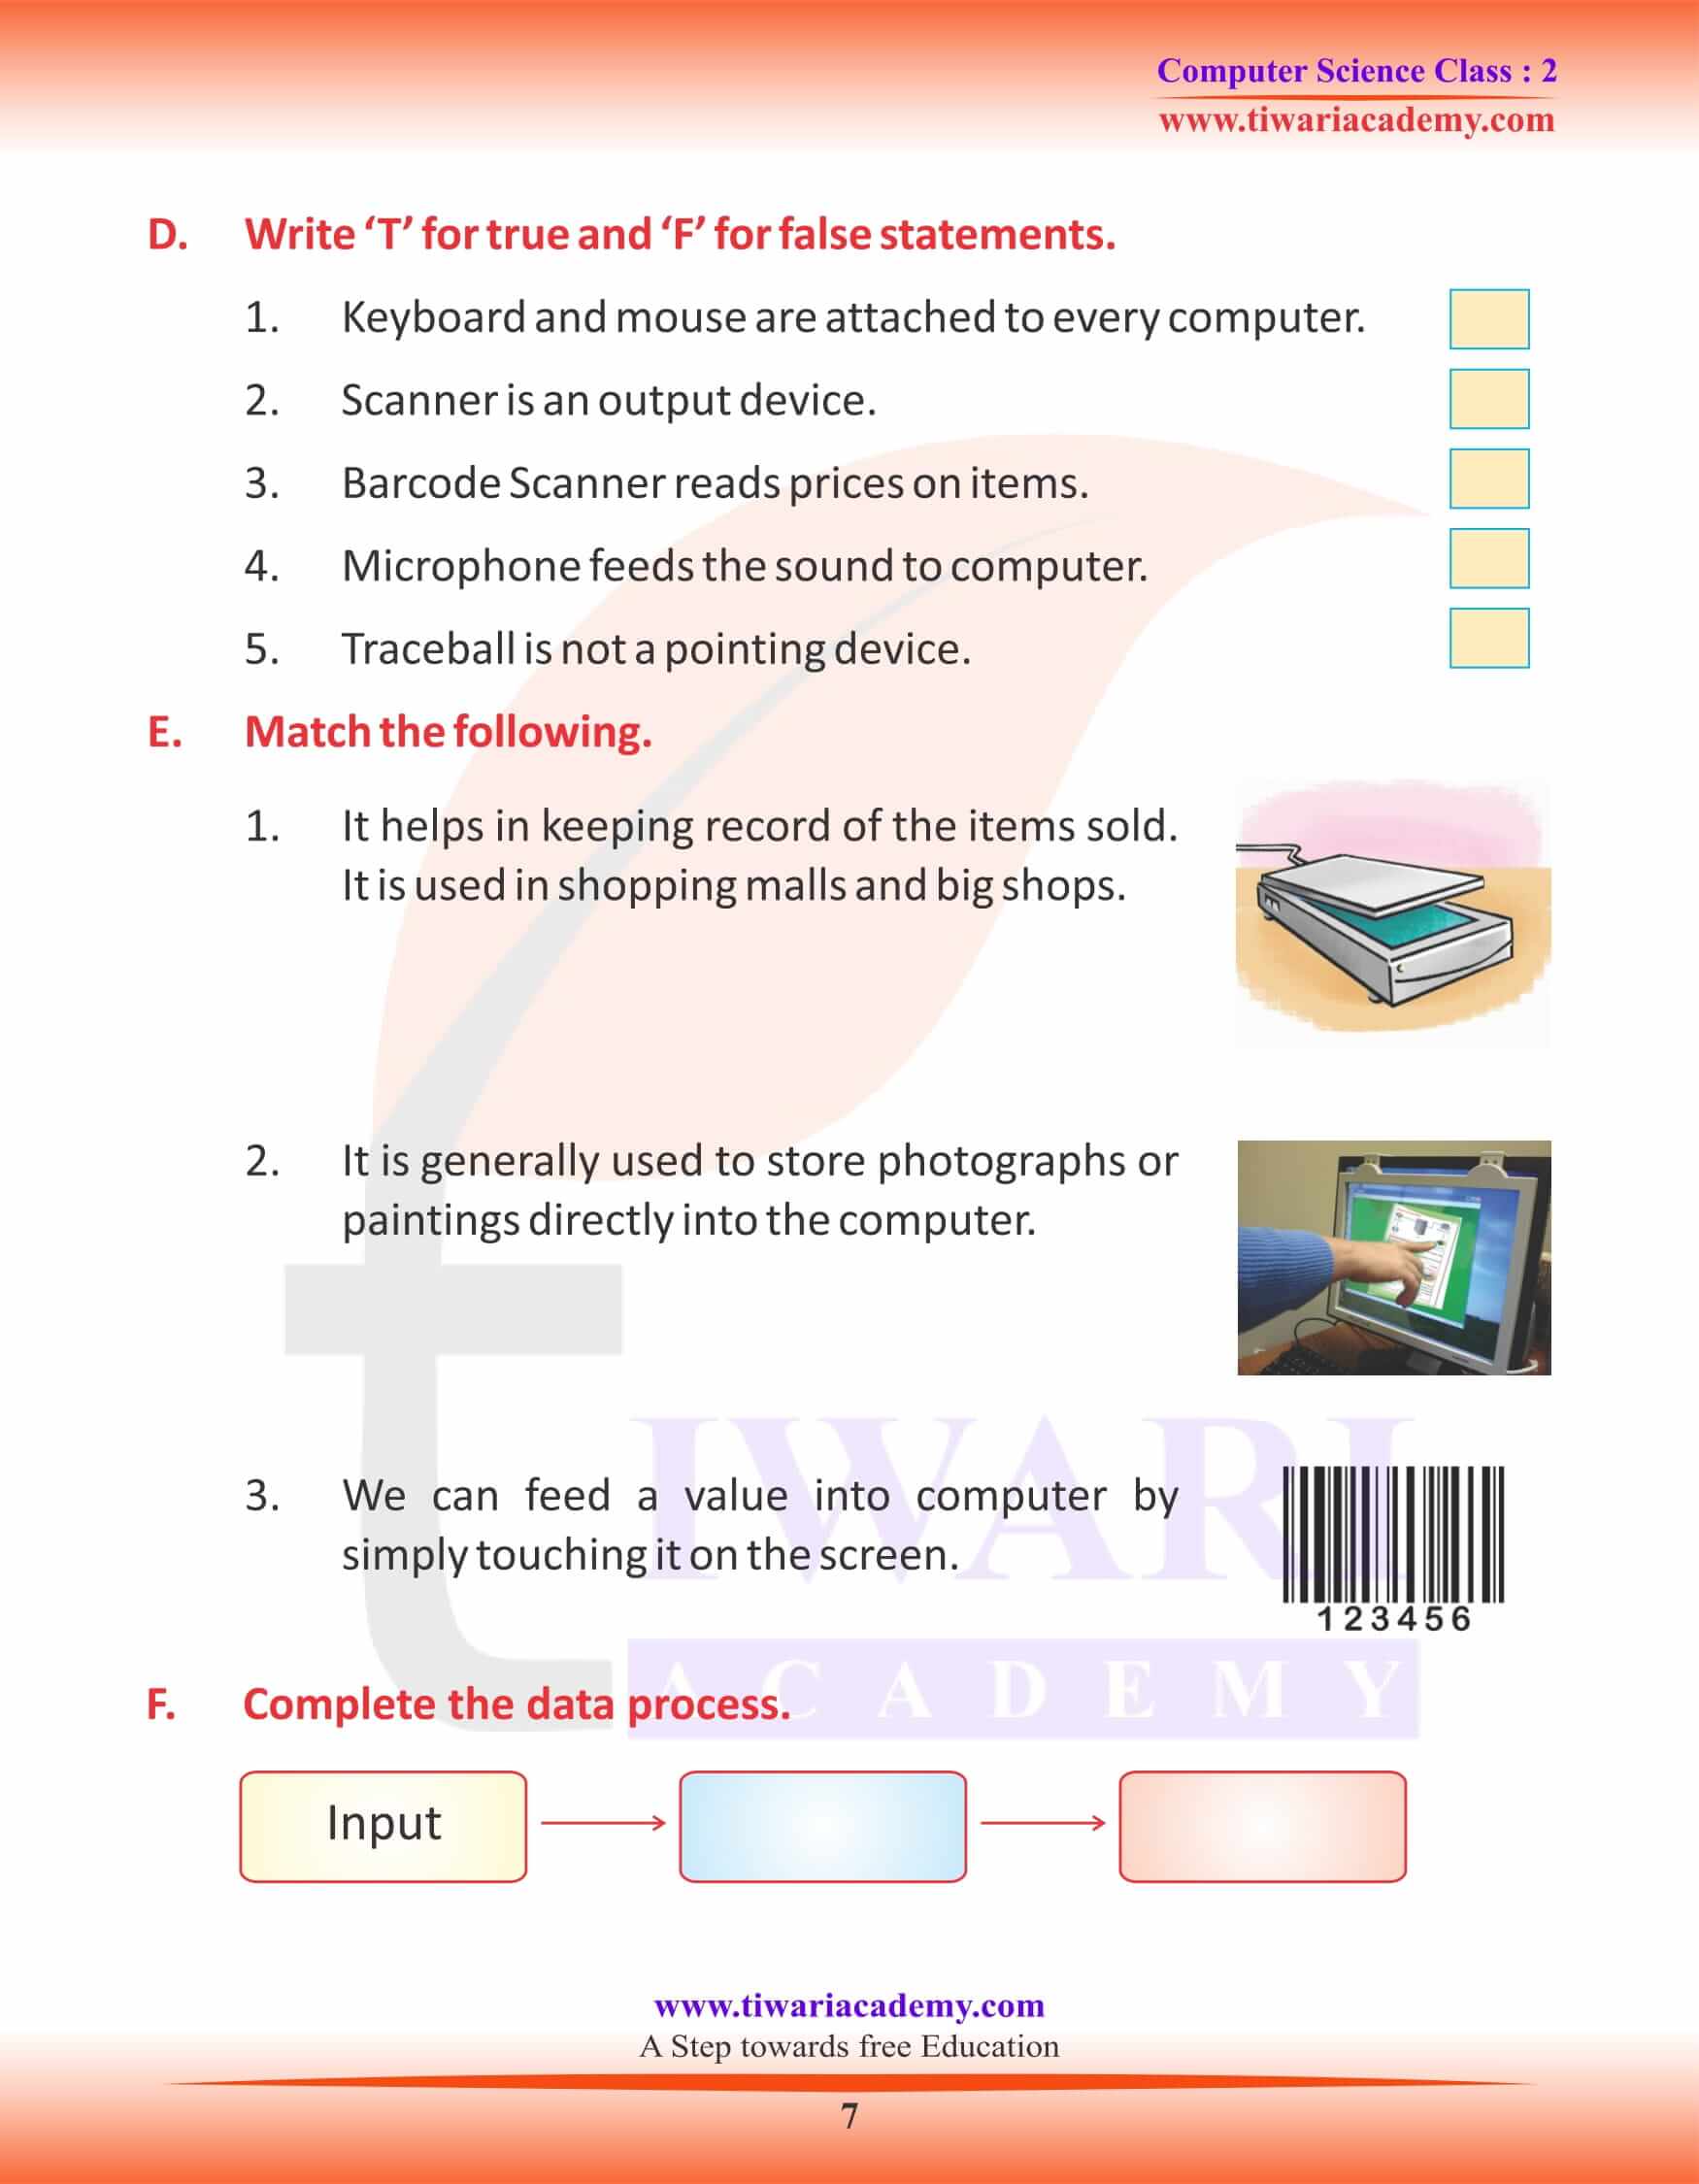 NCERT Solutions for Class 2 Computer Science 4 Question Answers